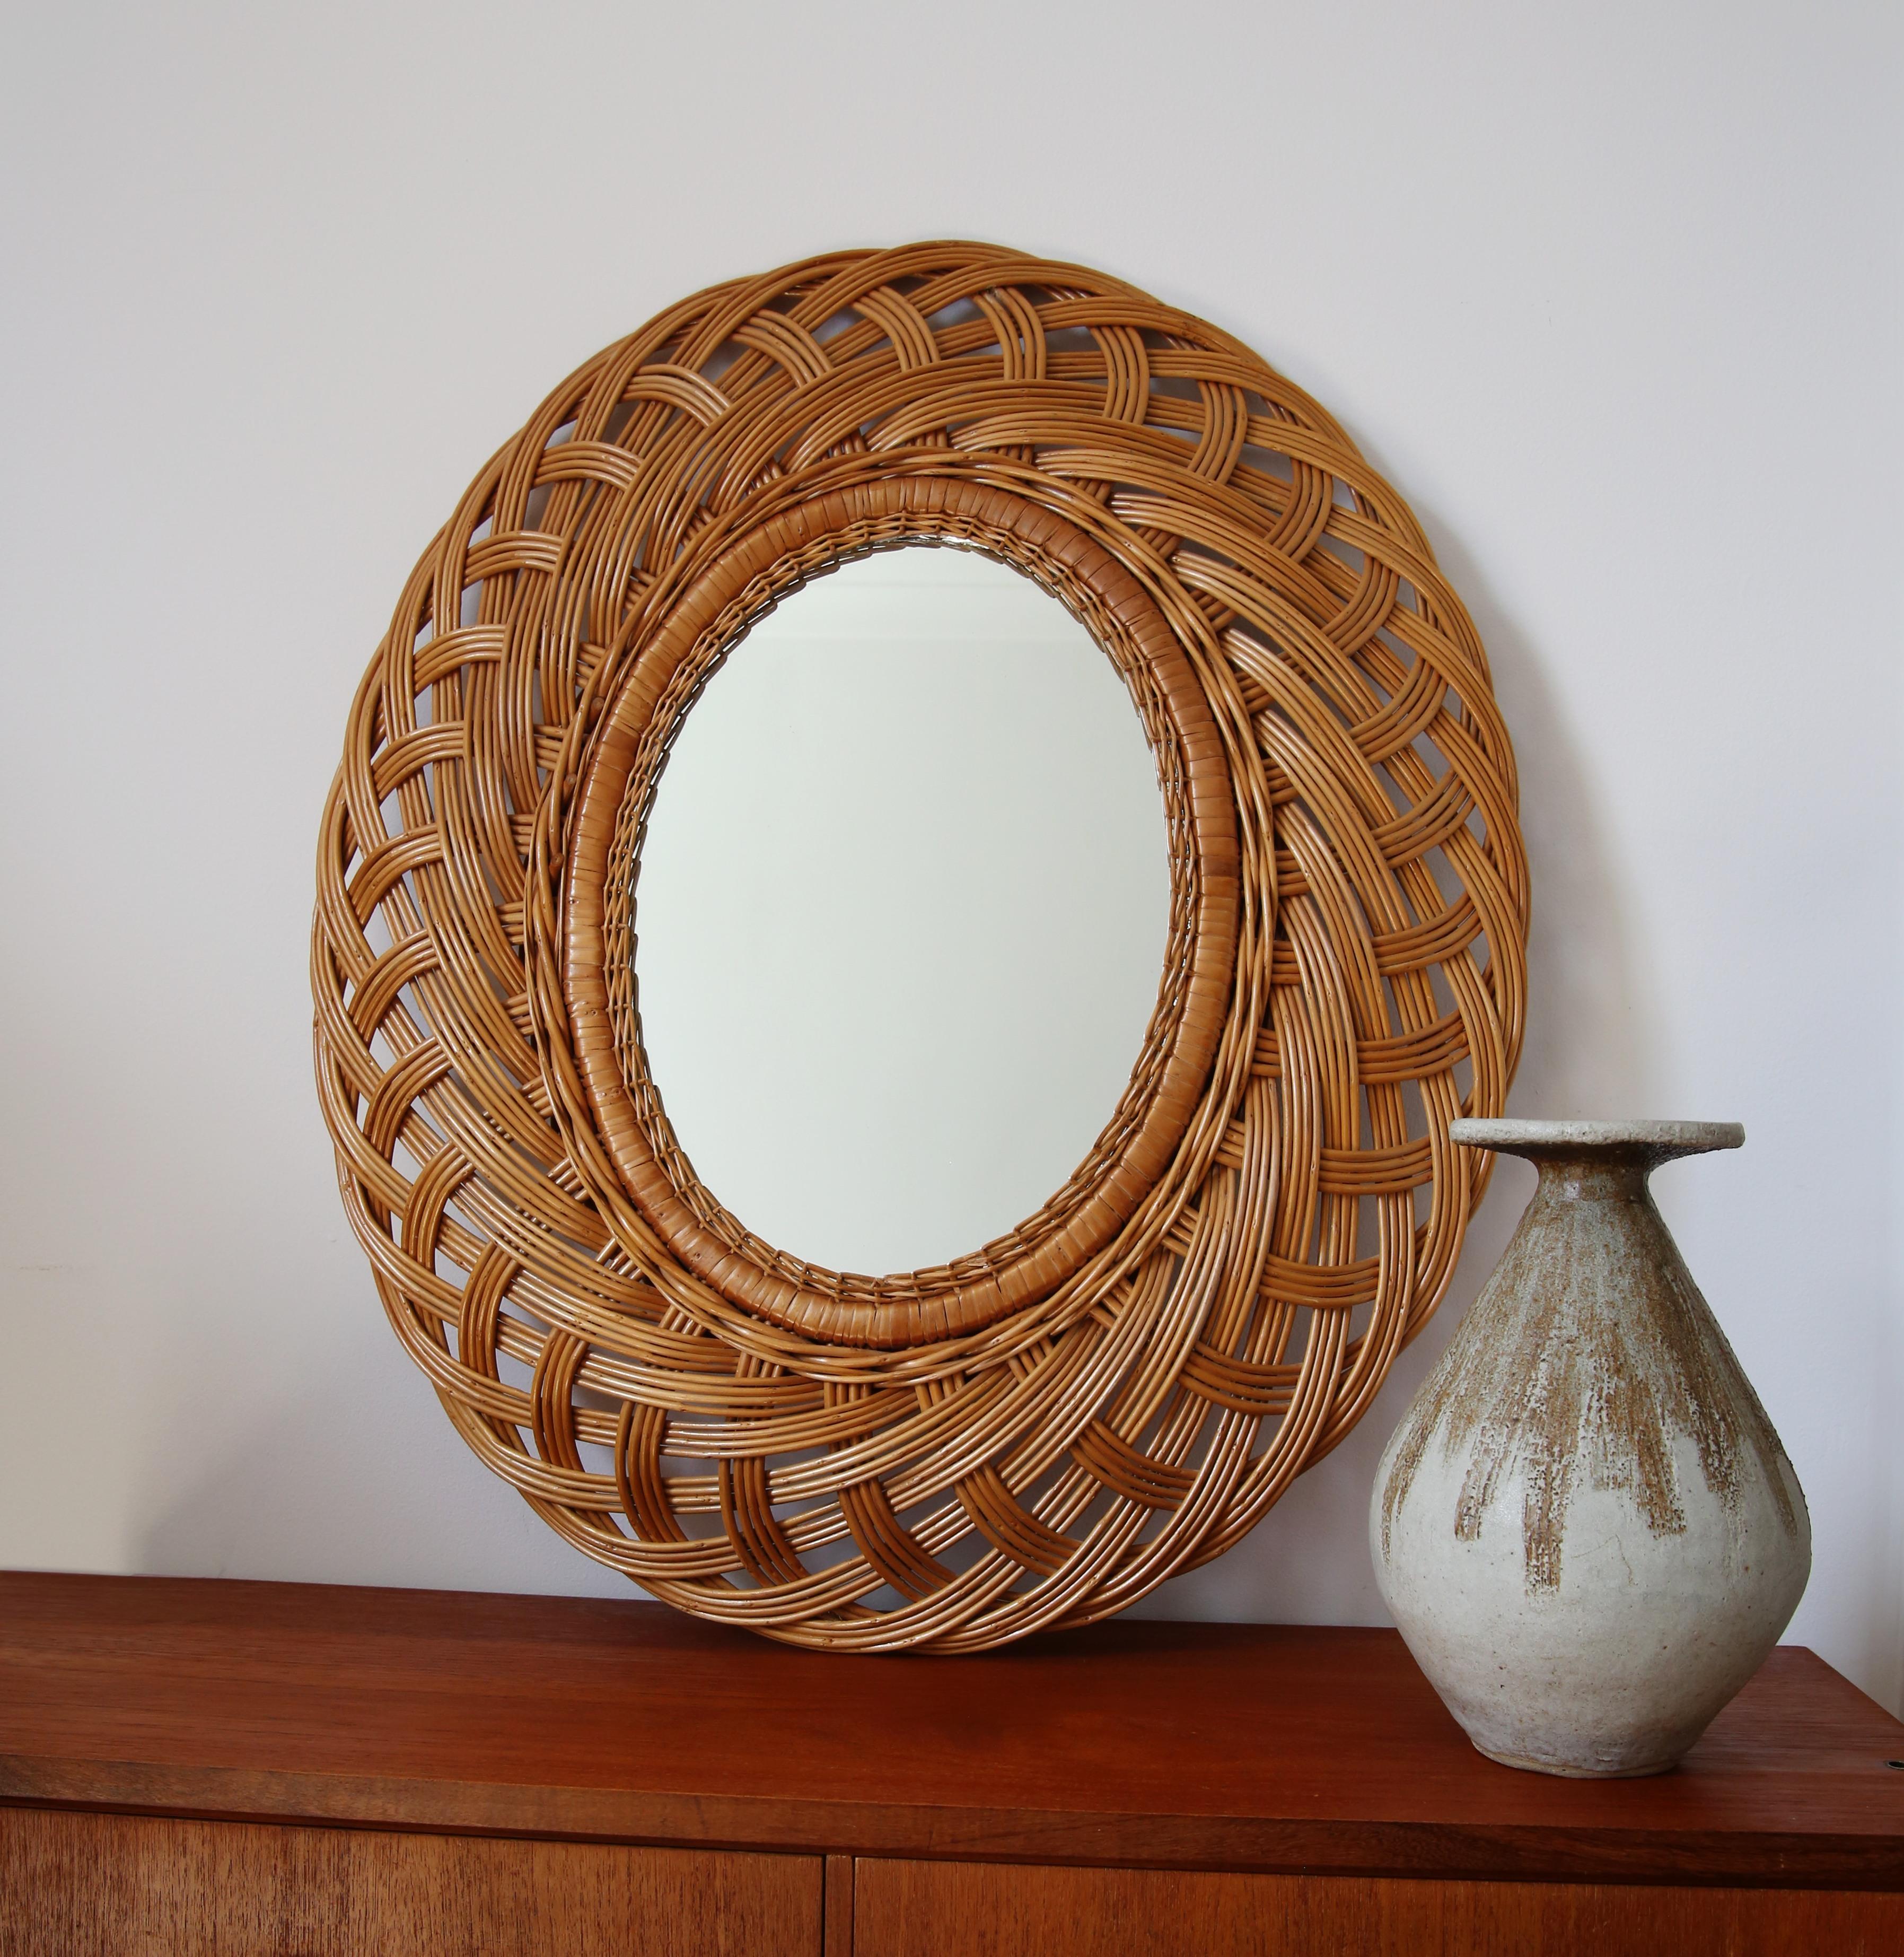 Lovely wicker Mid Century Swedish oval mirror with a wide organic woven wicker frame in a rich warm colour material

There is a delicacy to the wicker on the frame and a deep fluid sweeping design created from the weaving. 
The frame consists of a